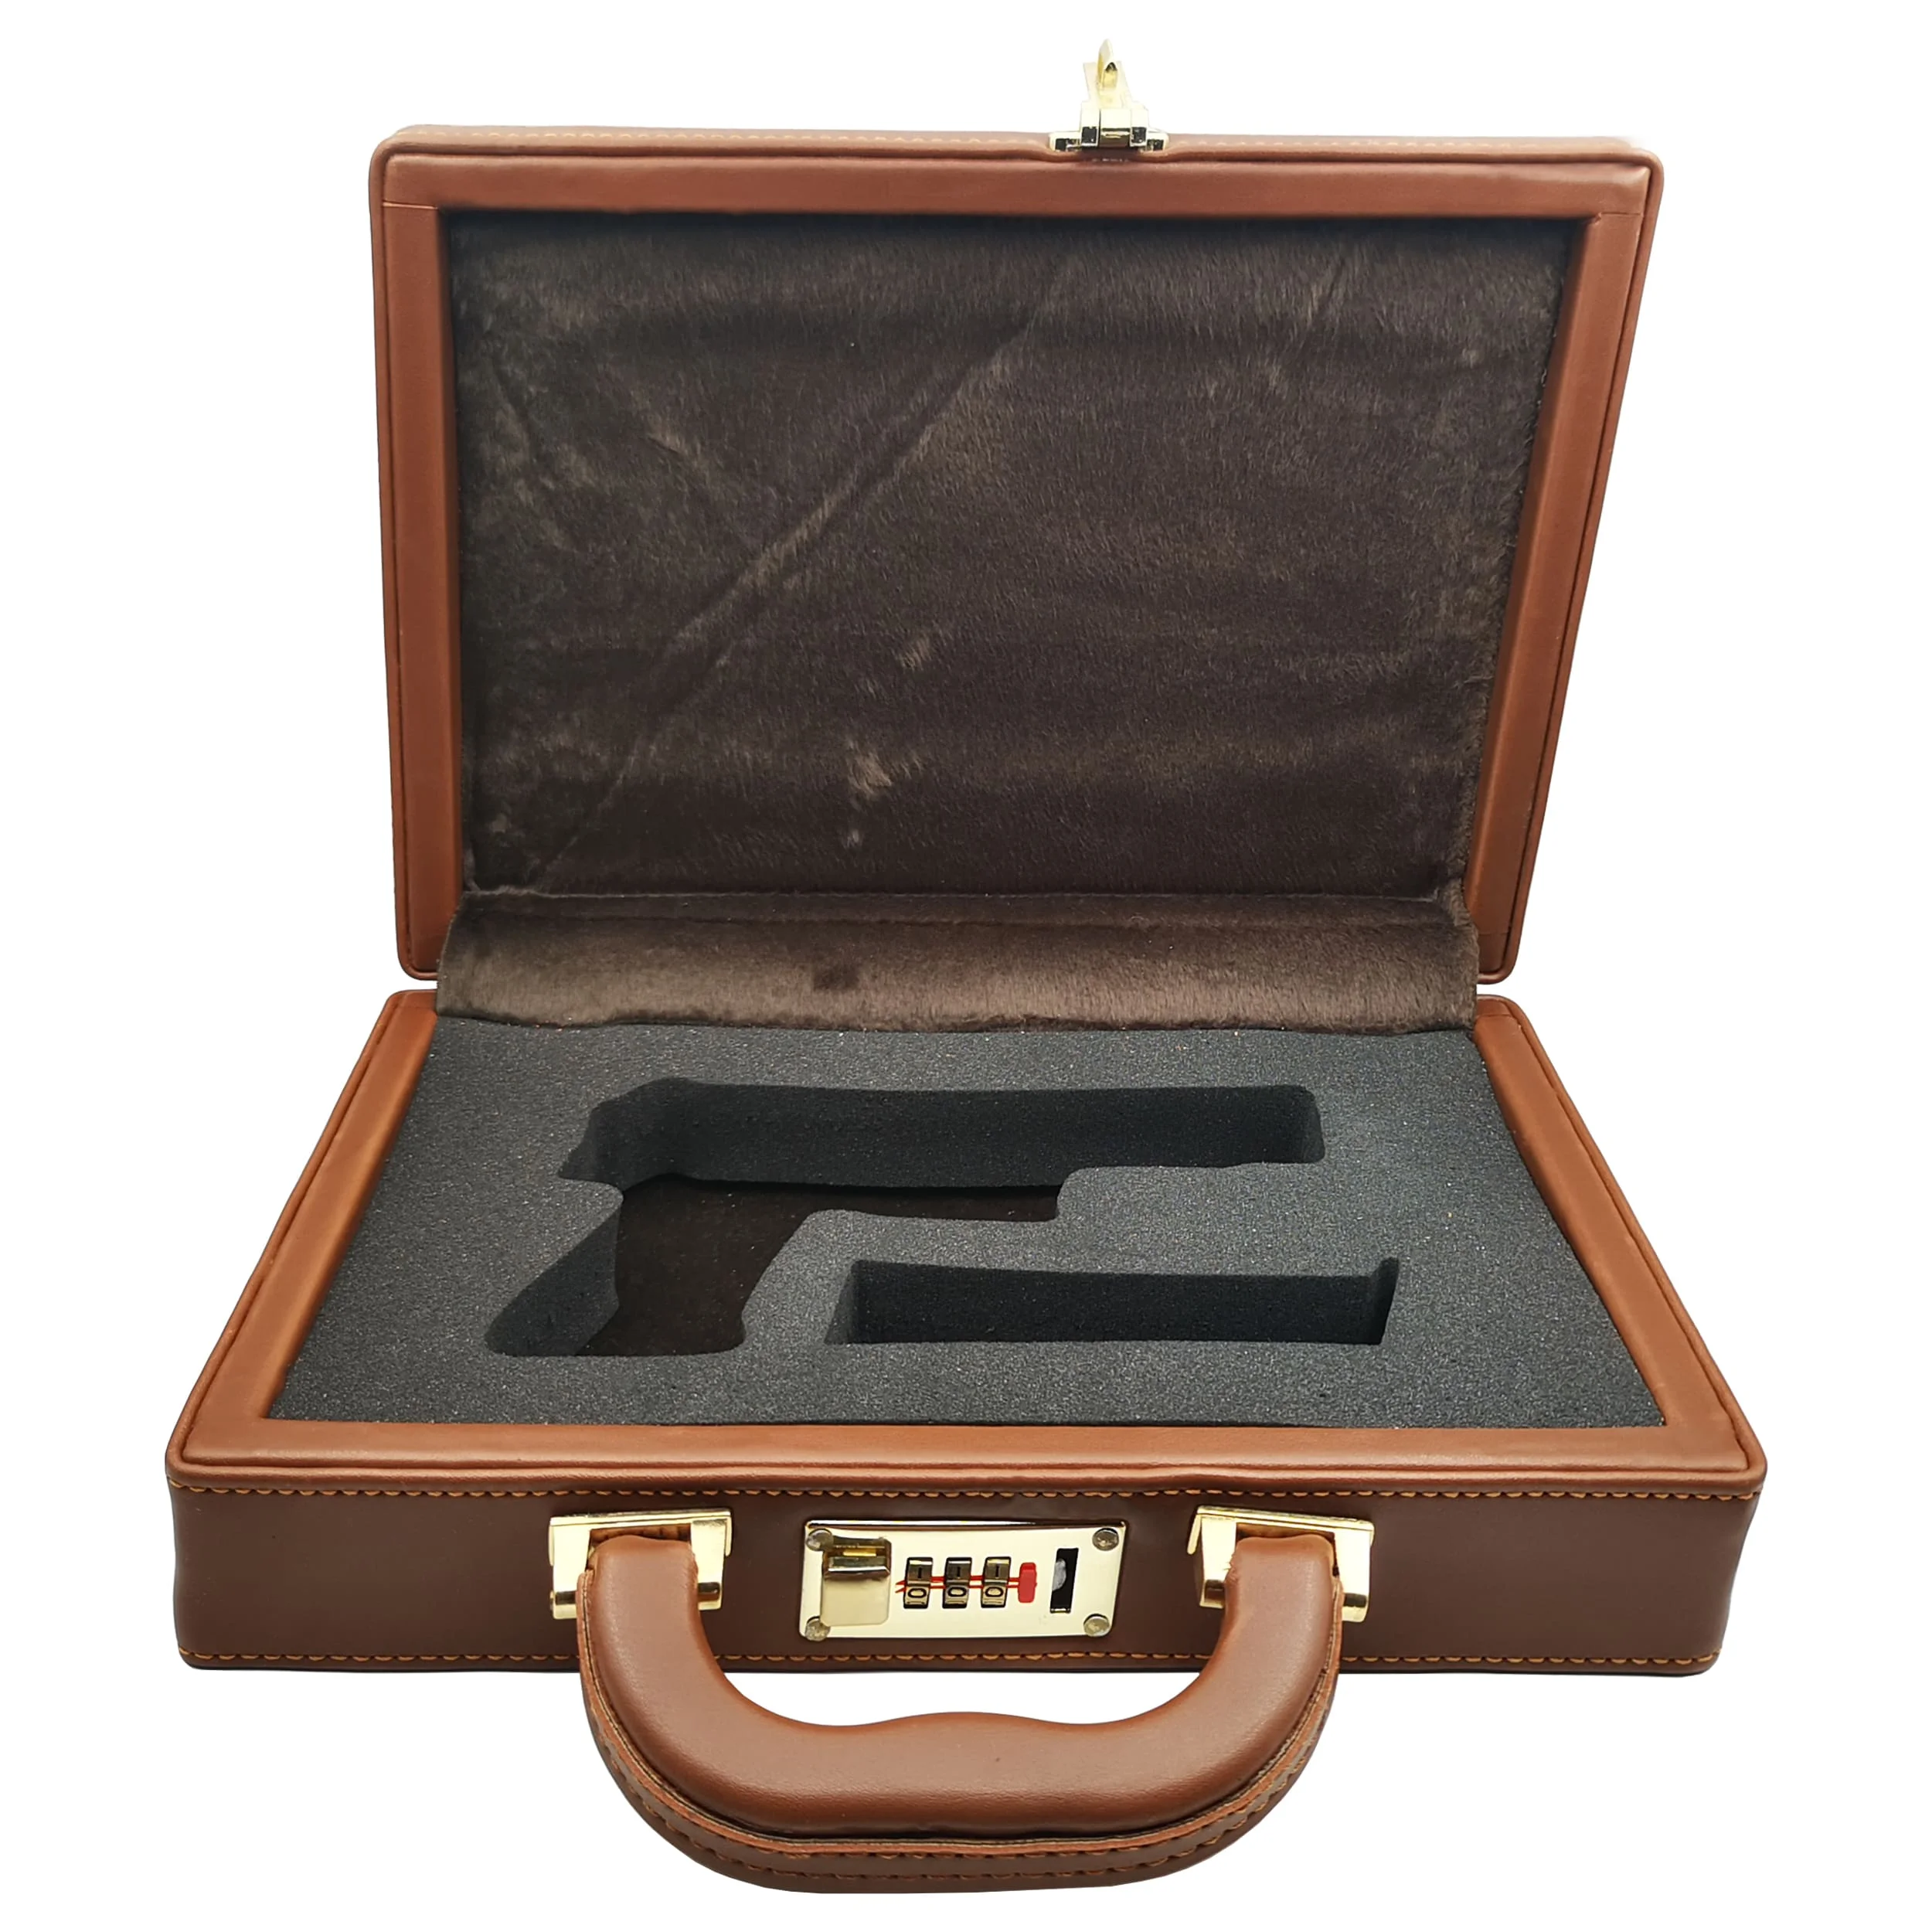 

Canik TP9 SF Elite Special Leather Gun Case Bond Style Personalized Password Lock System Handgun Carry And Storage Woden Box